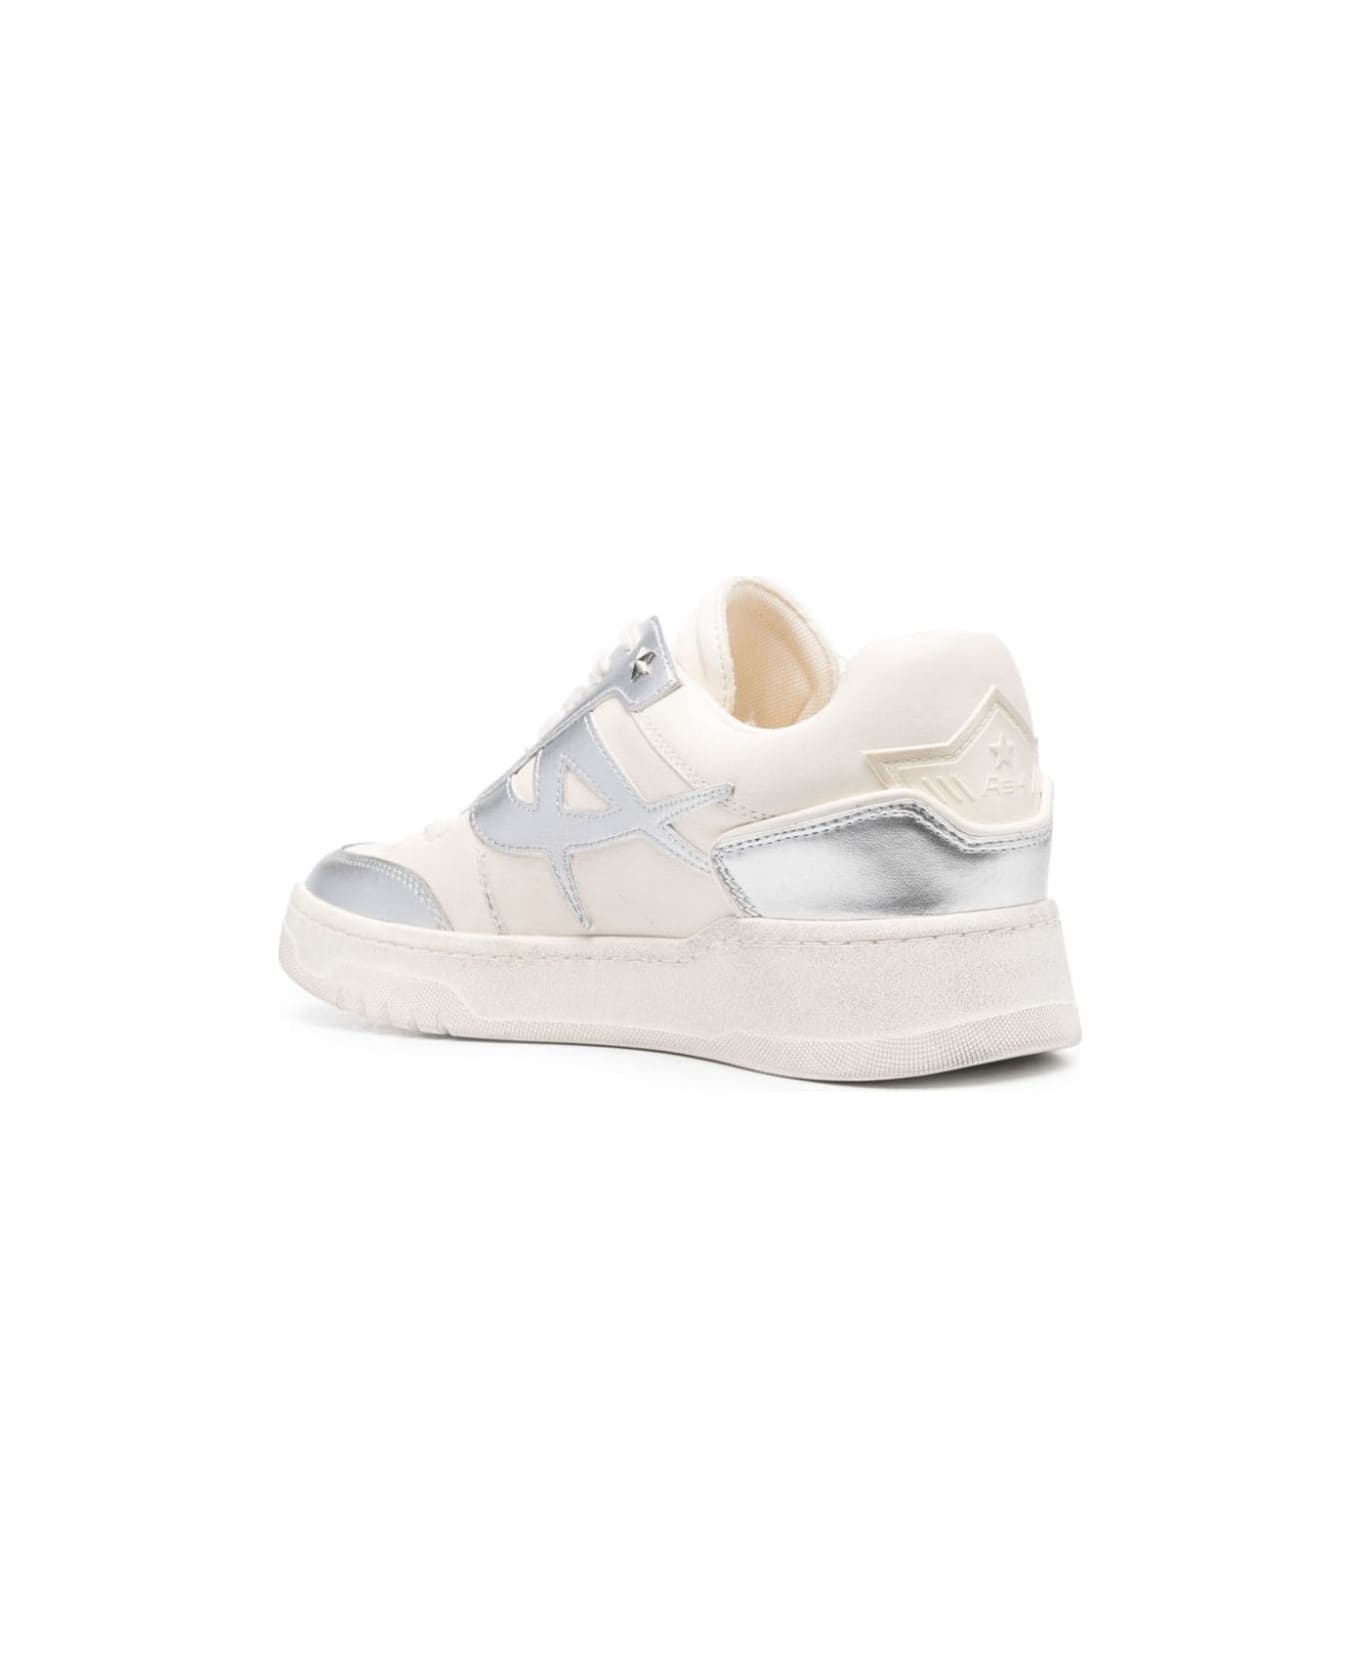 Ash 'blake' White Low Top Sneakers With Metallic Details In Leather Woman - White スニーカー